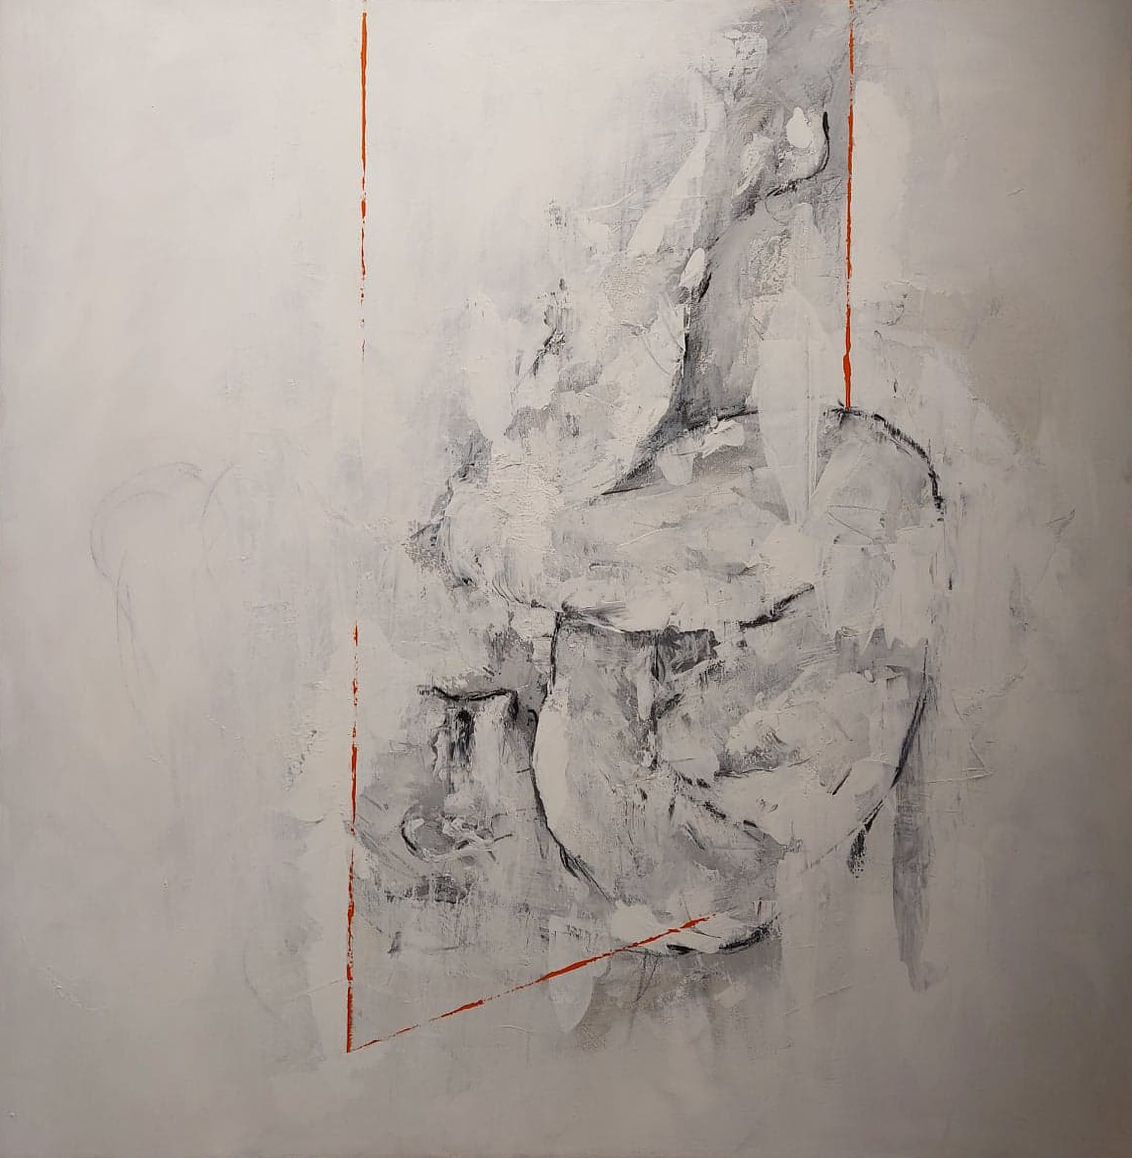 "Untitled" | 100x100 cm | Graphite, charcoal and acrylic